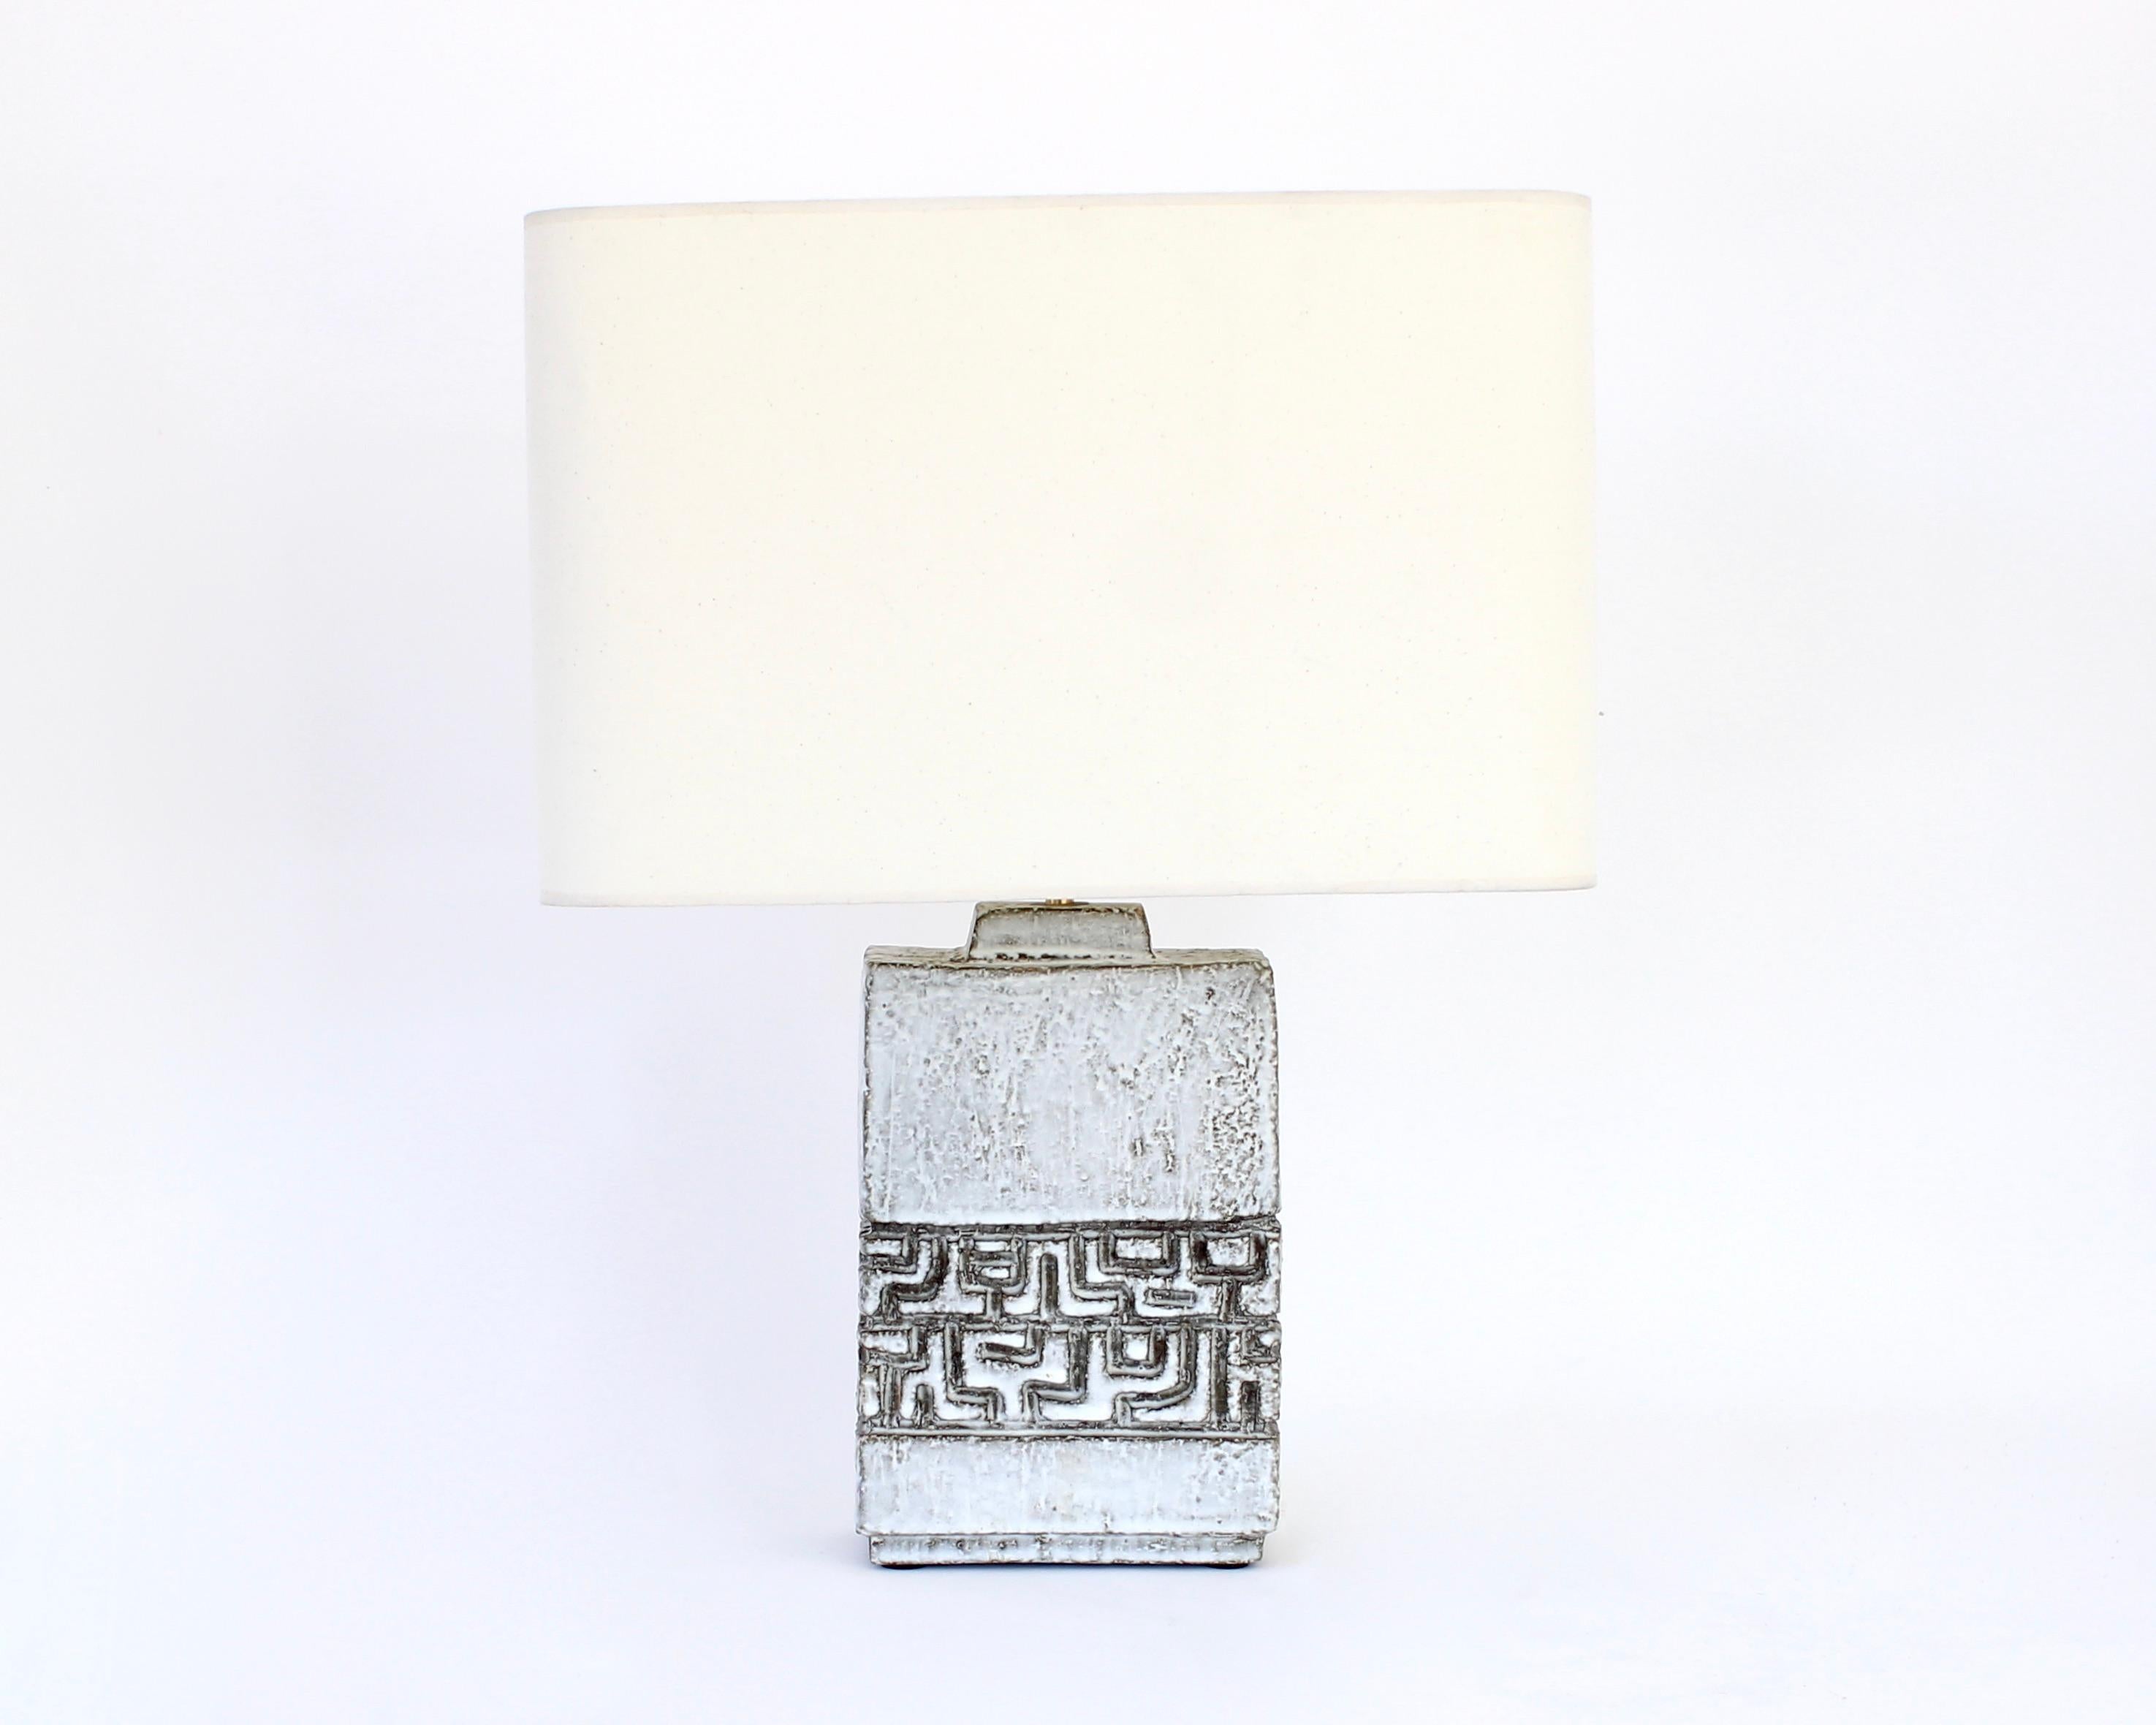 Marius Bessone ceramic table lamp with shade. Bessone had his ceramic studio and atelier in Vallauris France.
This lamp has iconic Bessone incised markings and iconic off white cream and brown gray glaze with a lot of texture in the surface of the